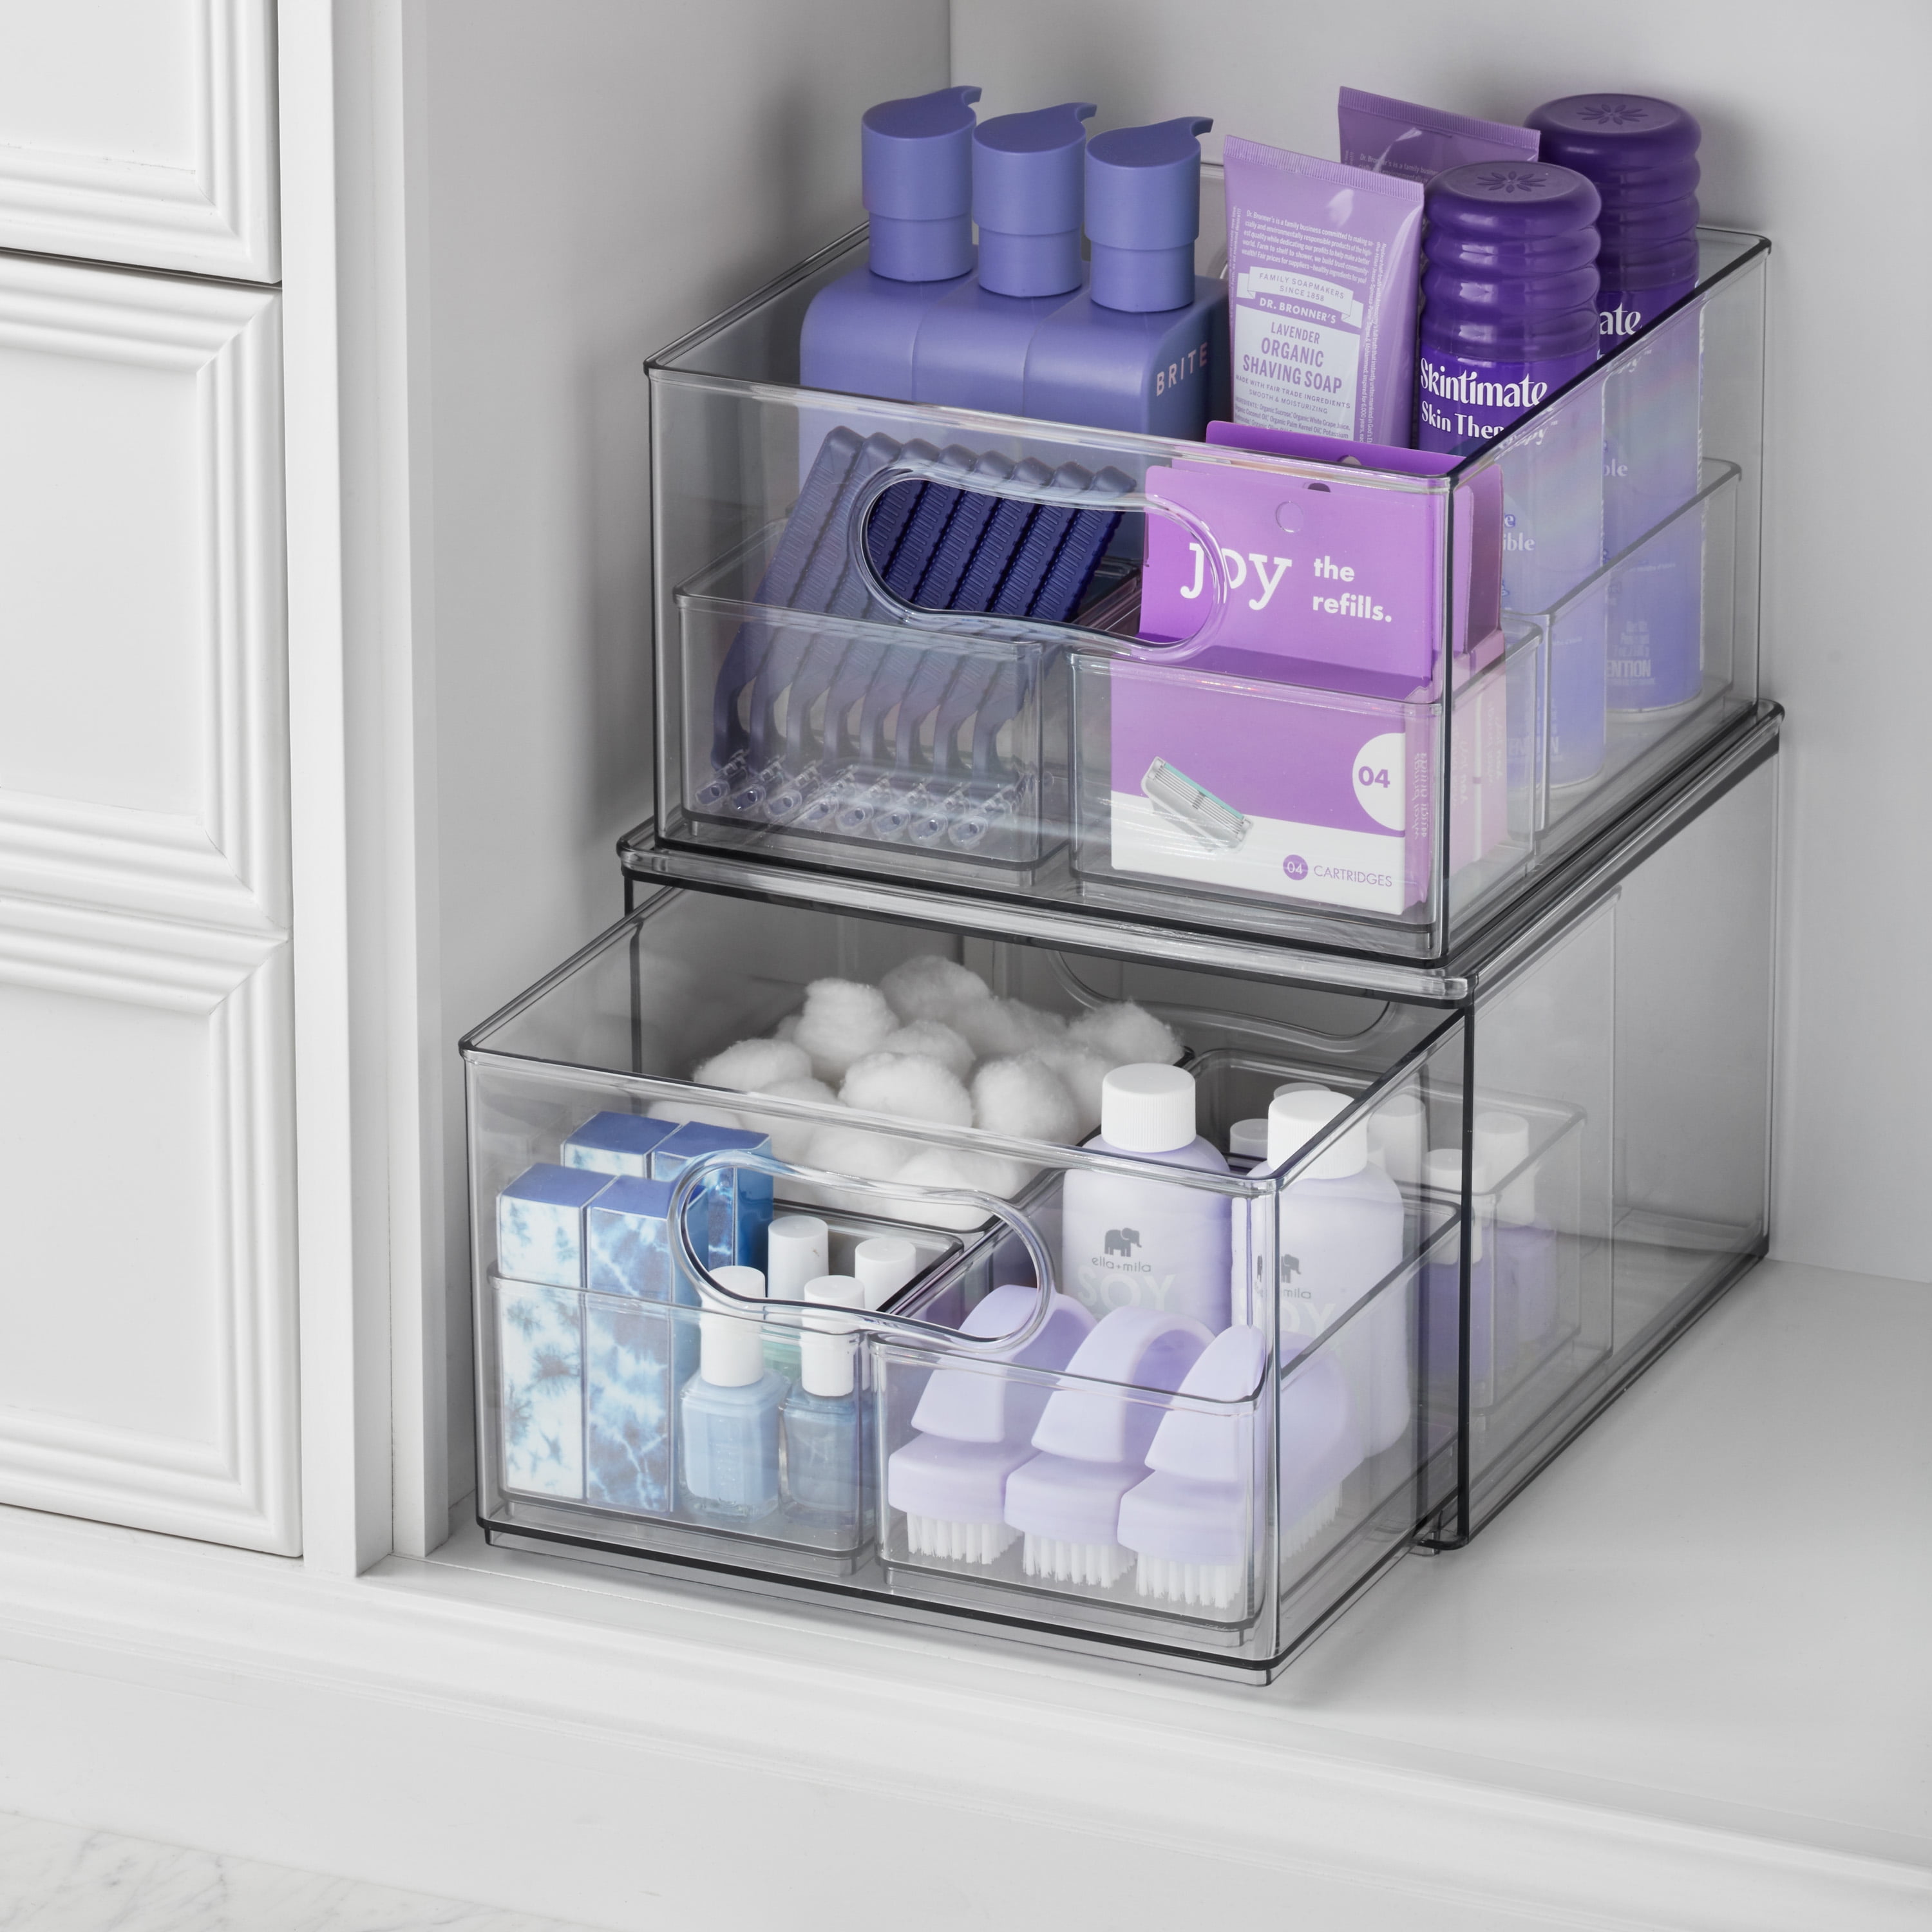 Bathroom Organization Tips with The Home Edit Container Store  Bathroom  organisation, Bathroom storage organization, The home edit